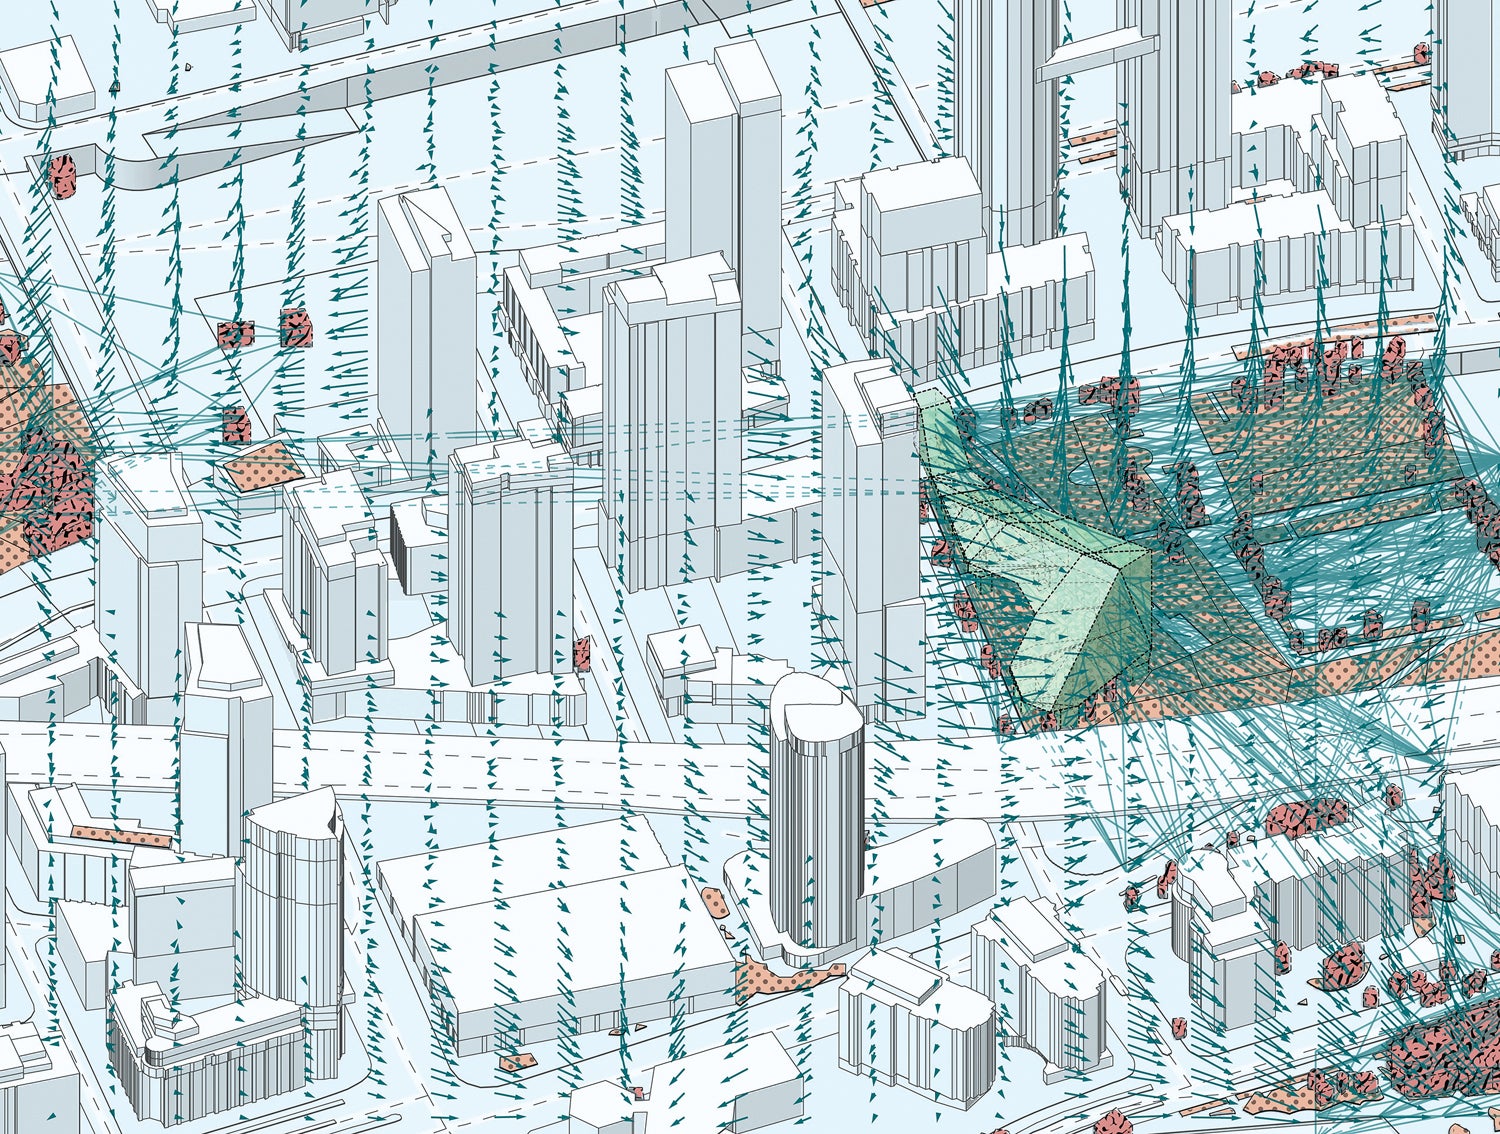 Two- and three-dimensional mapping is used to analyze the movement of birds through the city, and to locate interventions to facilitate their passage.